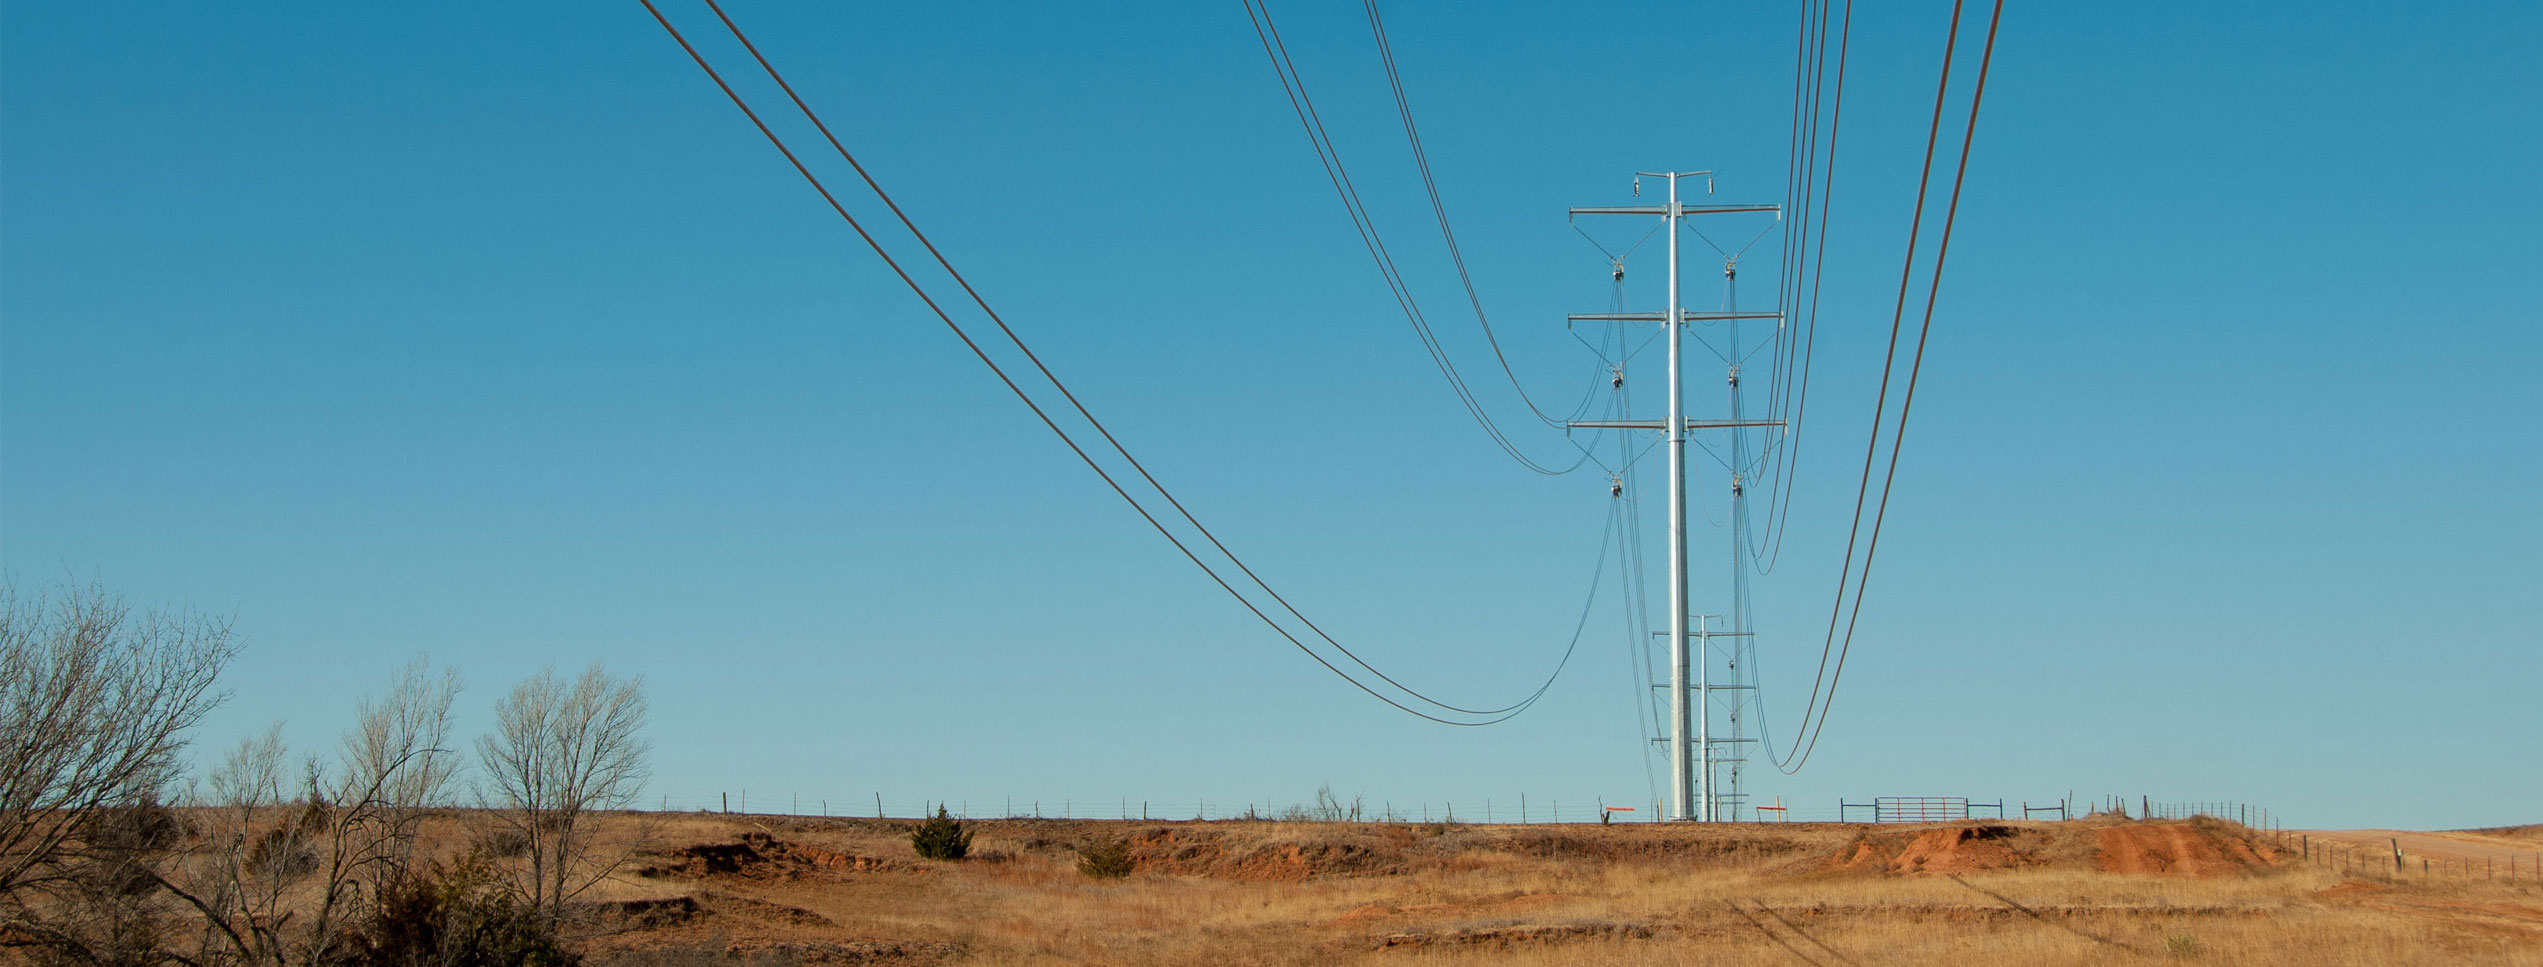 Woodward to Thistle Transmission Line Project